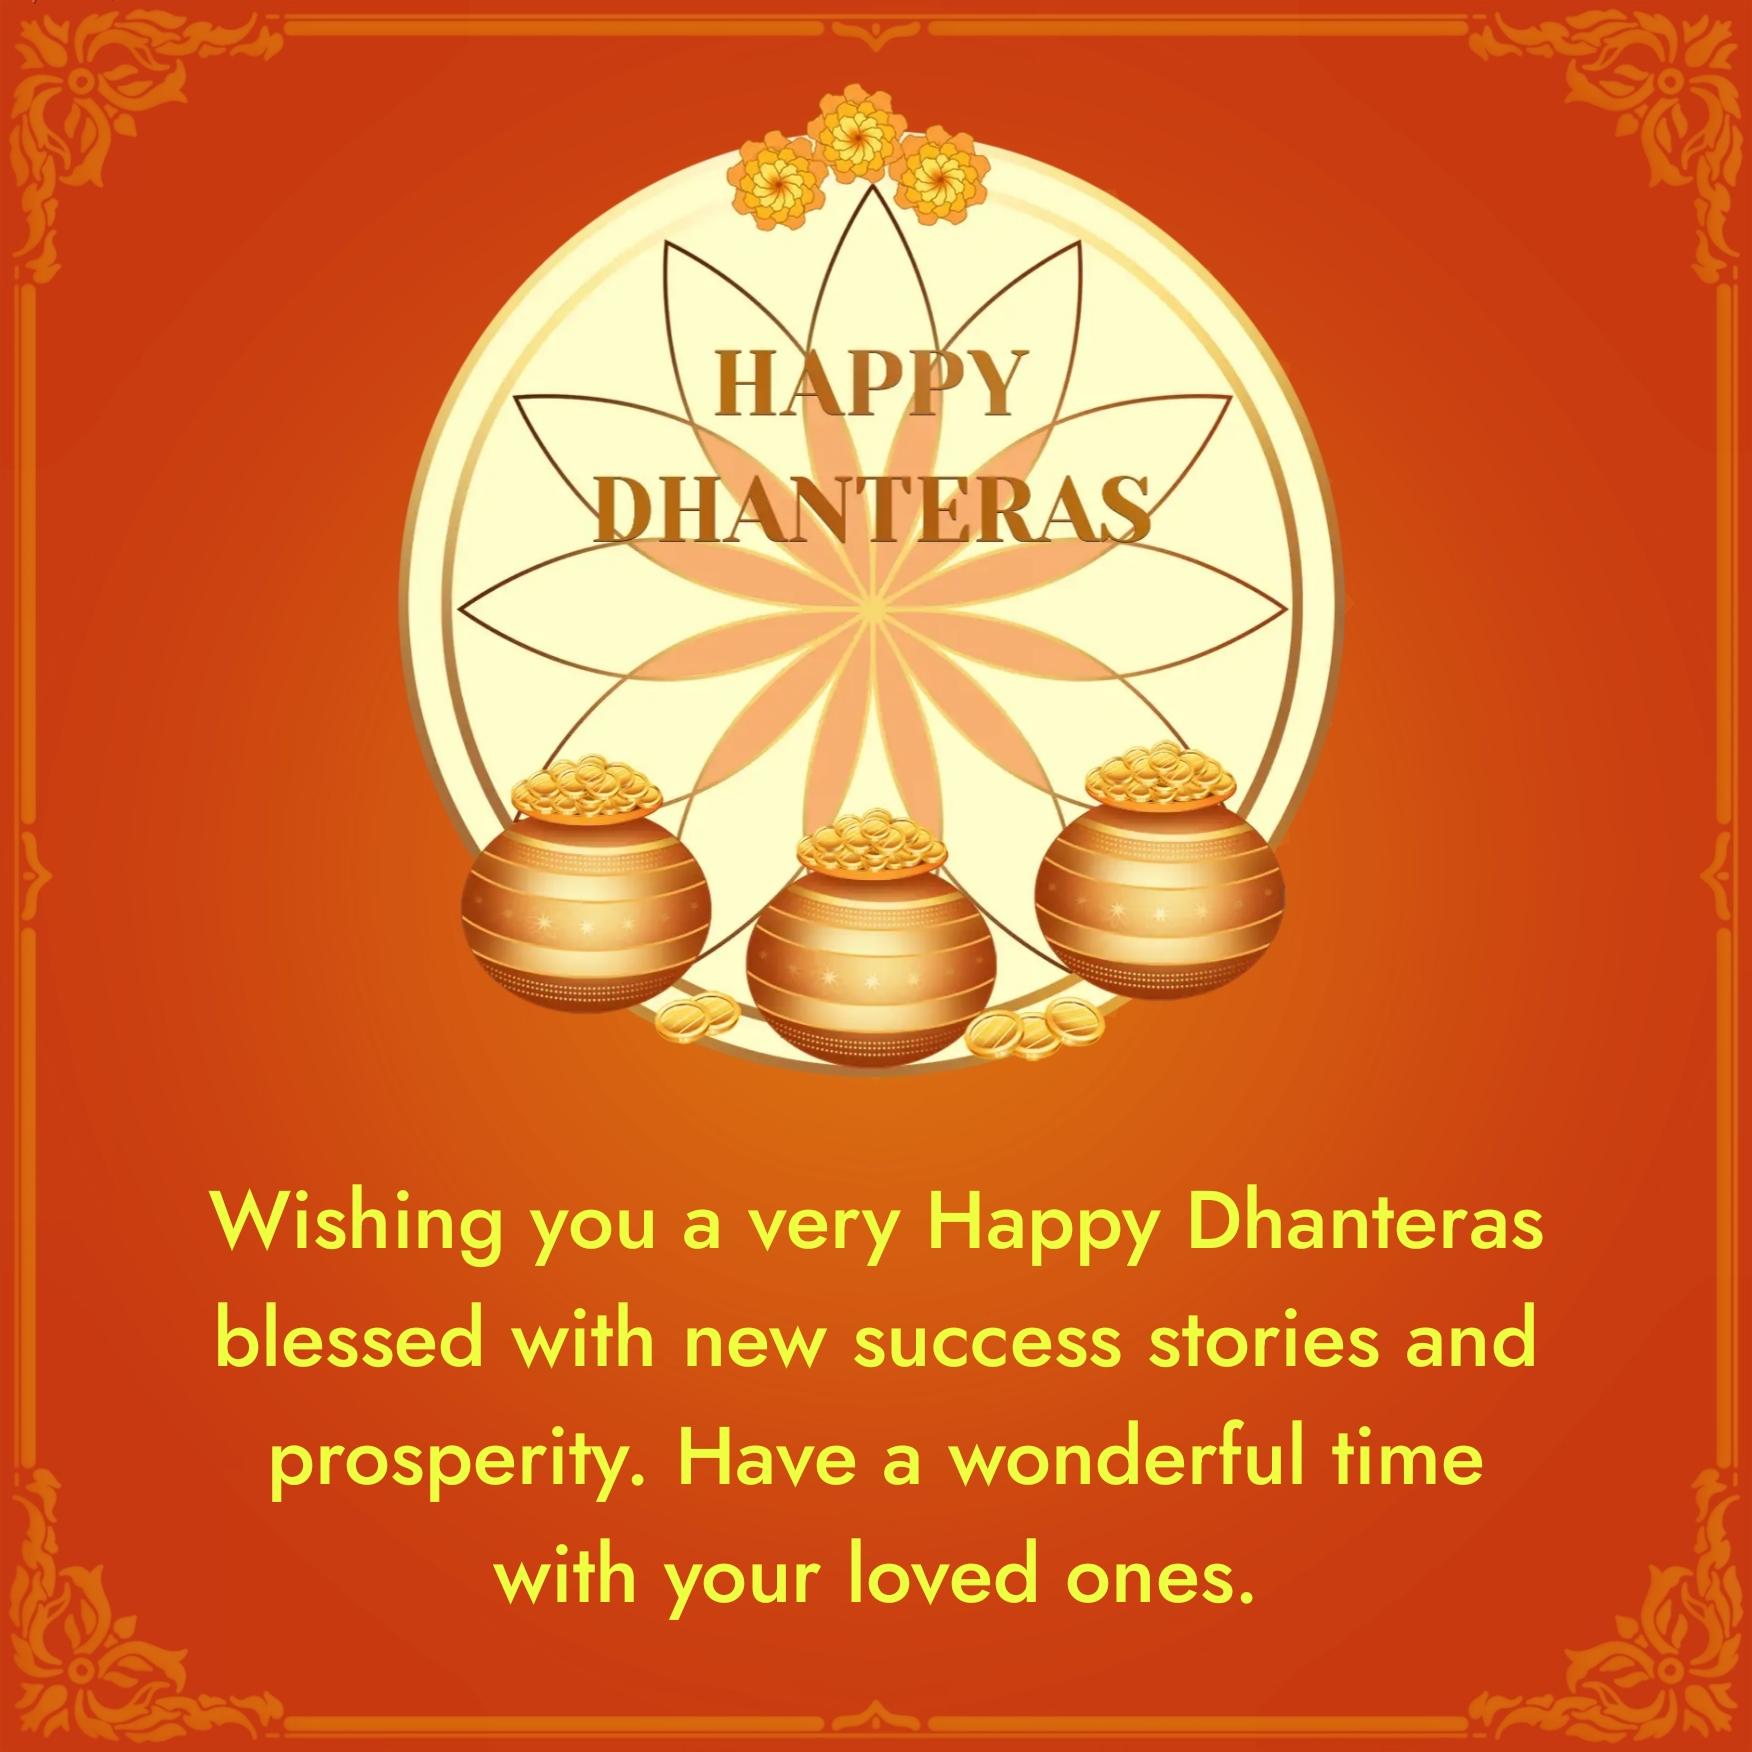 Wishing you a very Happy Dhanteras blessed